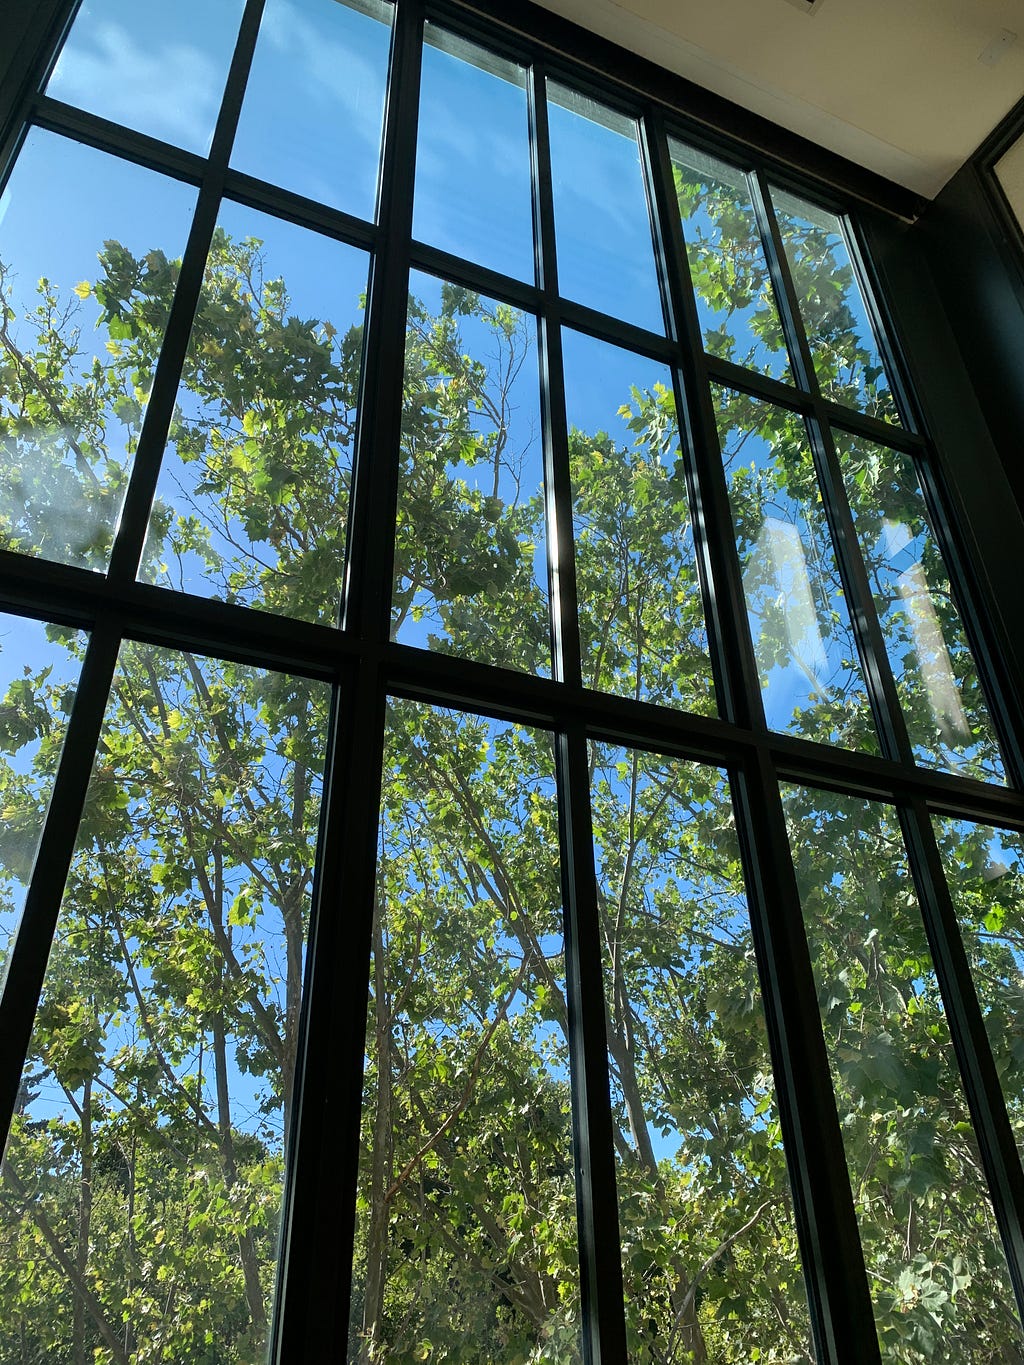 A floor-to-ceiling window with a tree on the other side during a sunny afternoon